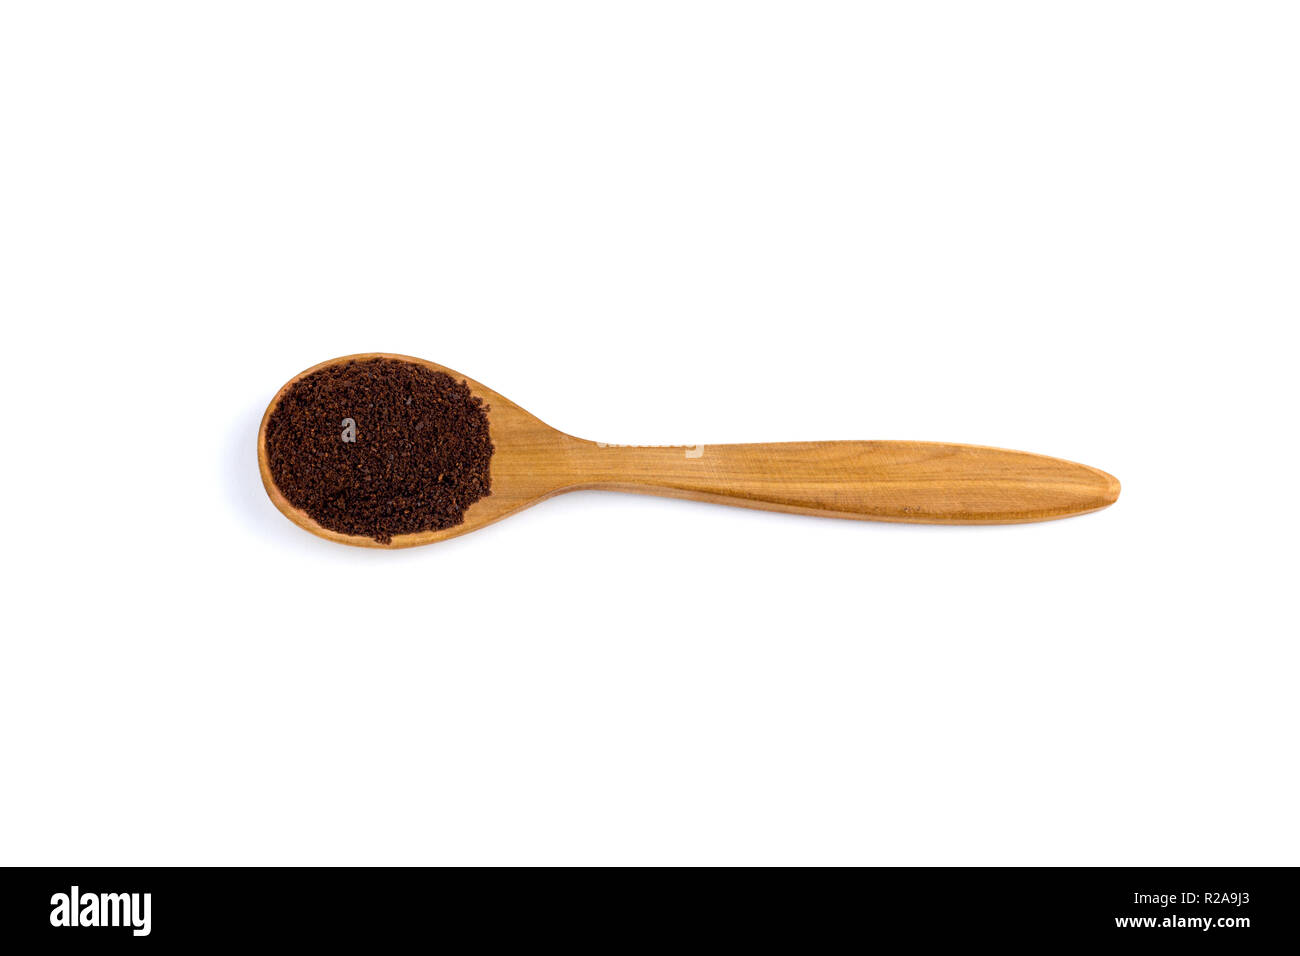 top view of a spoon of sandal wood with ground coffee beans   isolated on white background Stock Photo